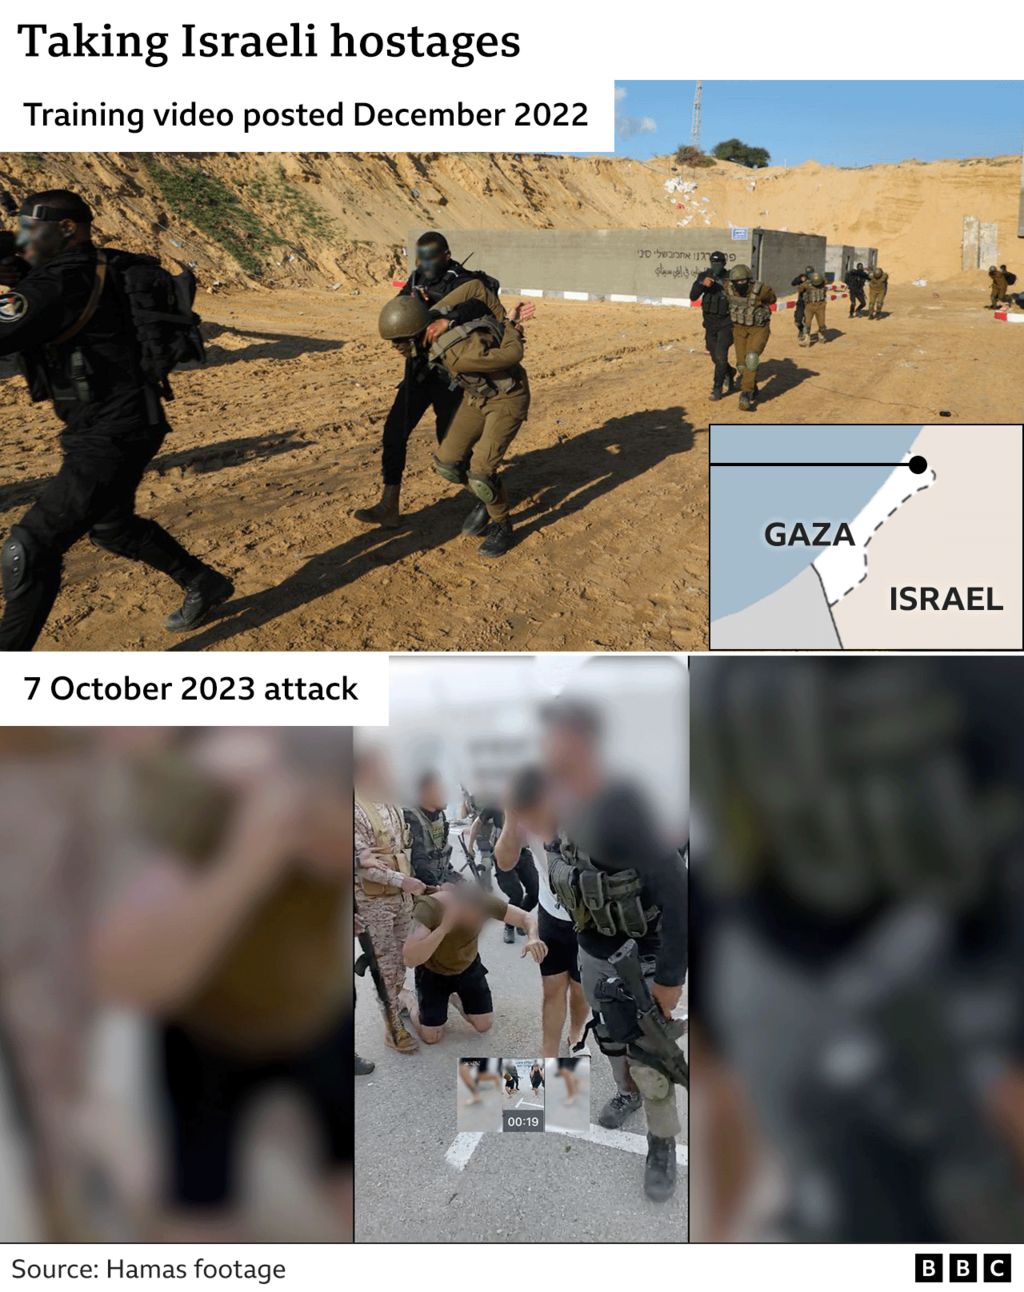 Images of Hamas taking hostages